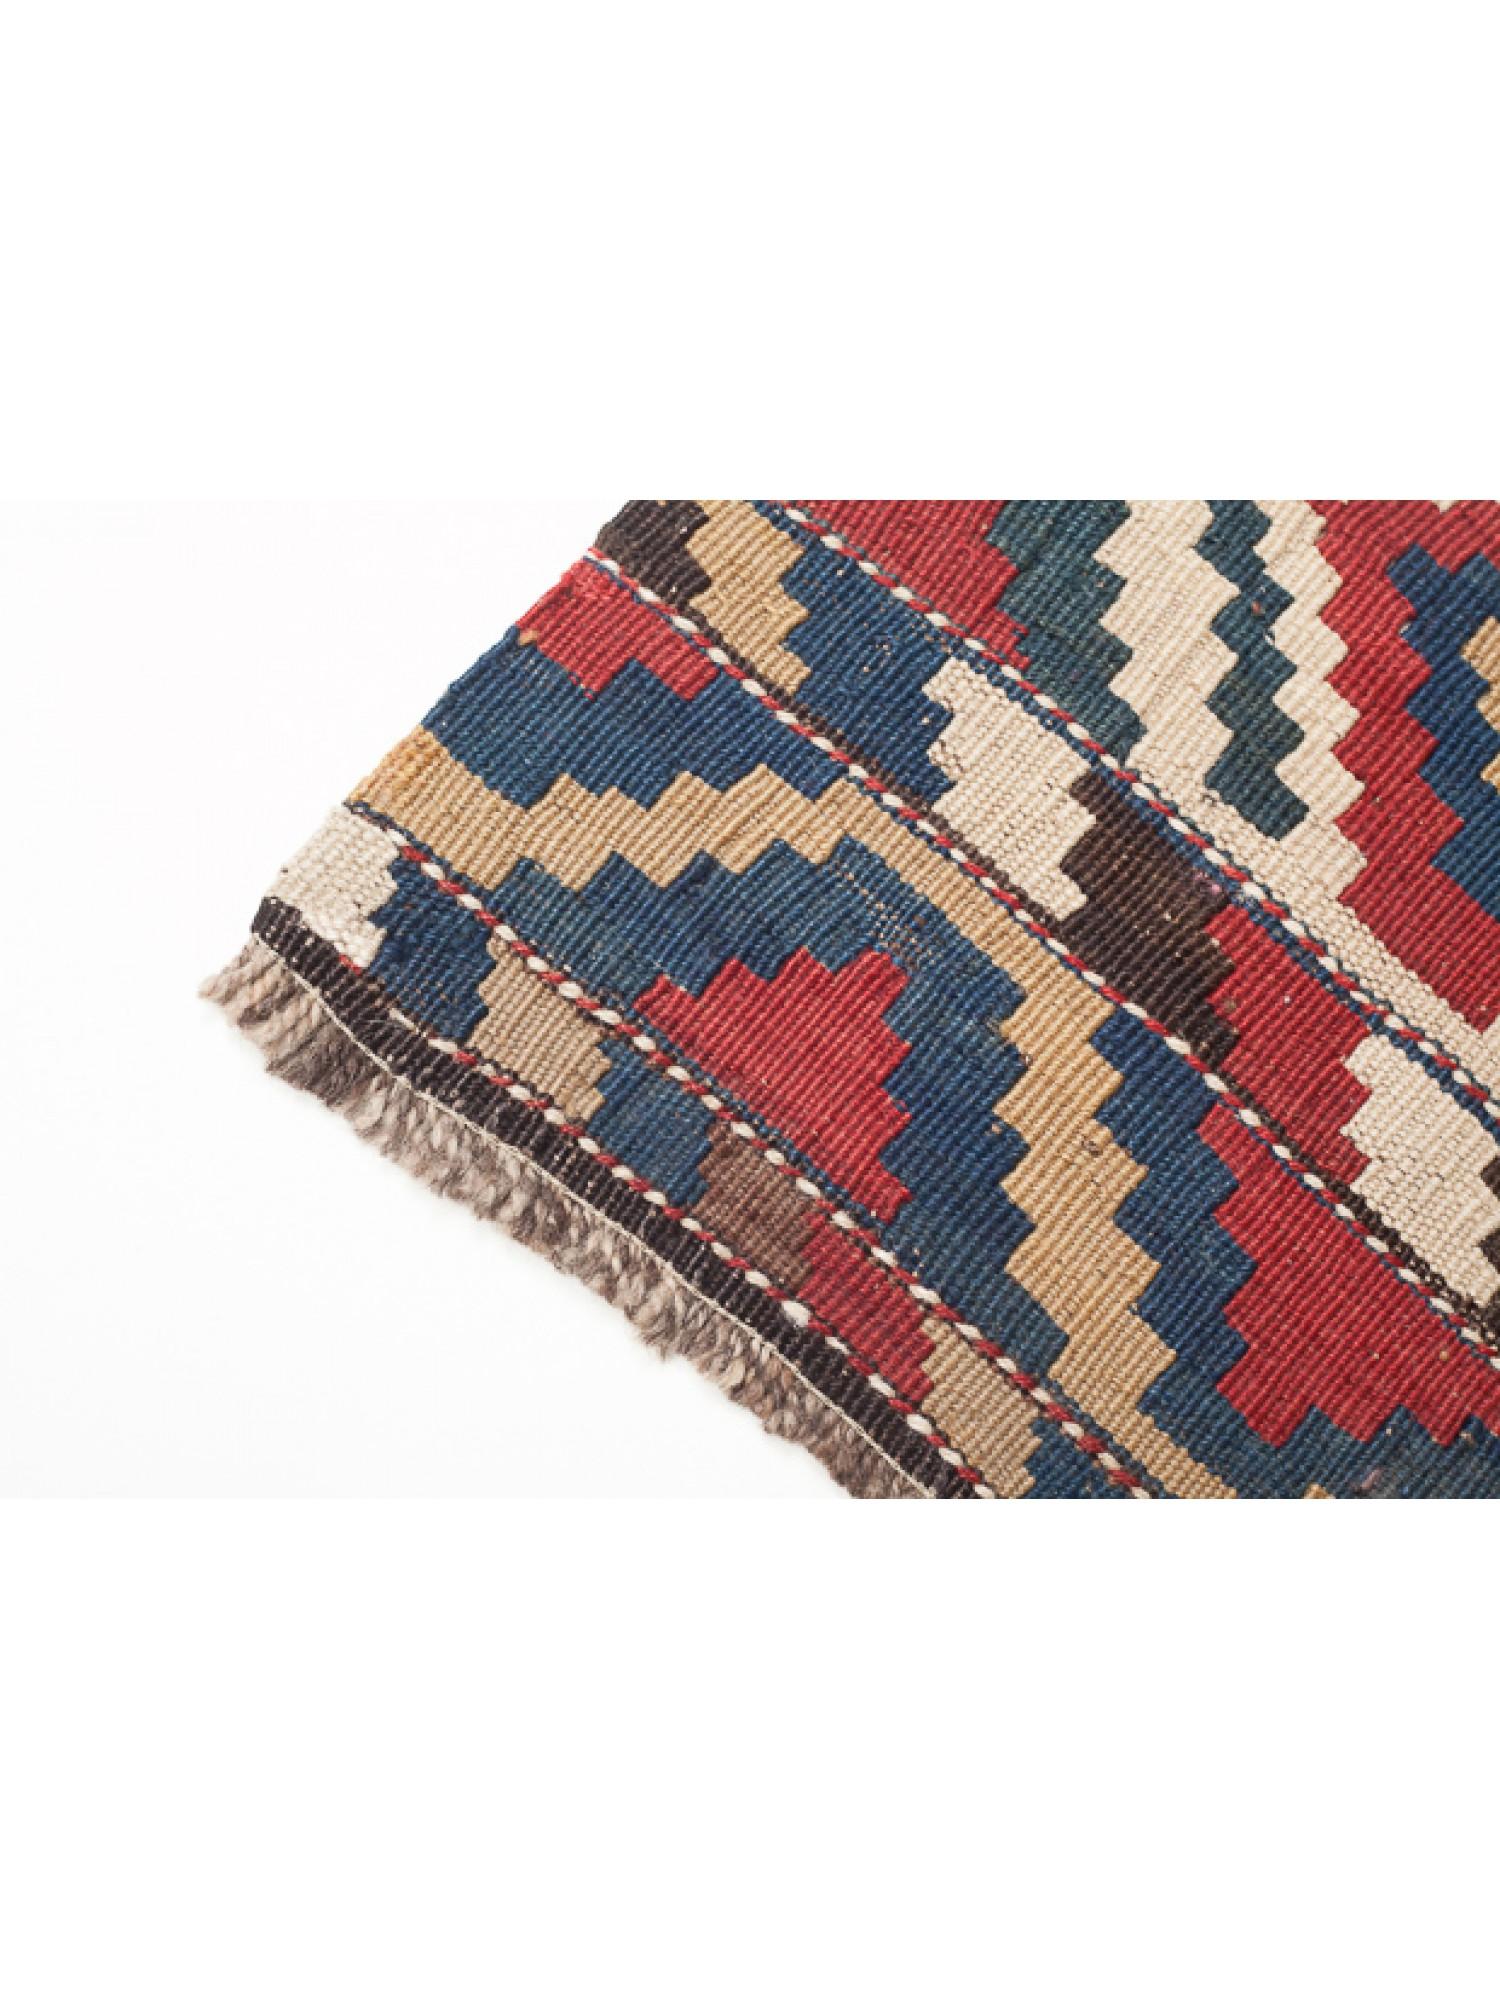 This is an antique collectible square early 20th century Kilim Woven Cradle Part from the Caucasus region with a rare and beautiful color composition.

Of the four countries that make up the Caucasus, Azerbaijan produces the most kilims, and the